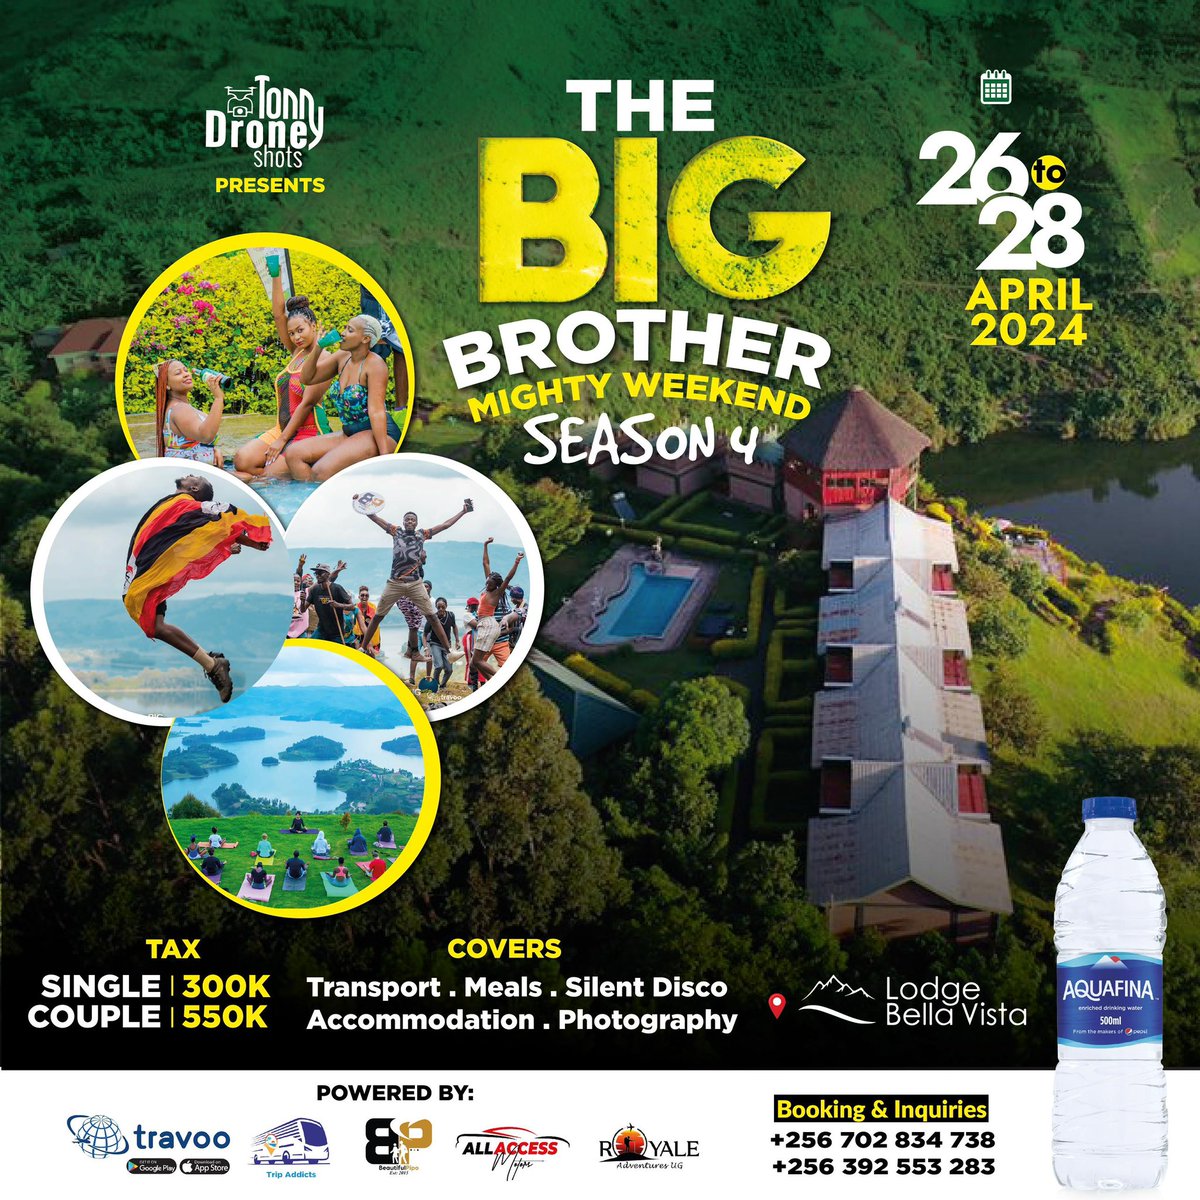 This weekend we hitting the road again after a very long time🔥 The big brother mighty weekend s4 happening from Friday to Sunday at BellaVista is the only place to be🎊🔥 #BBS4